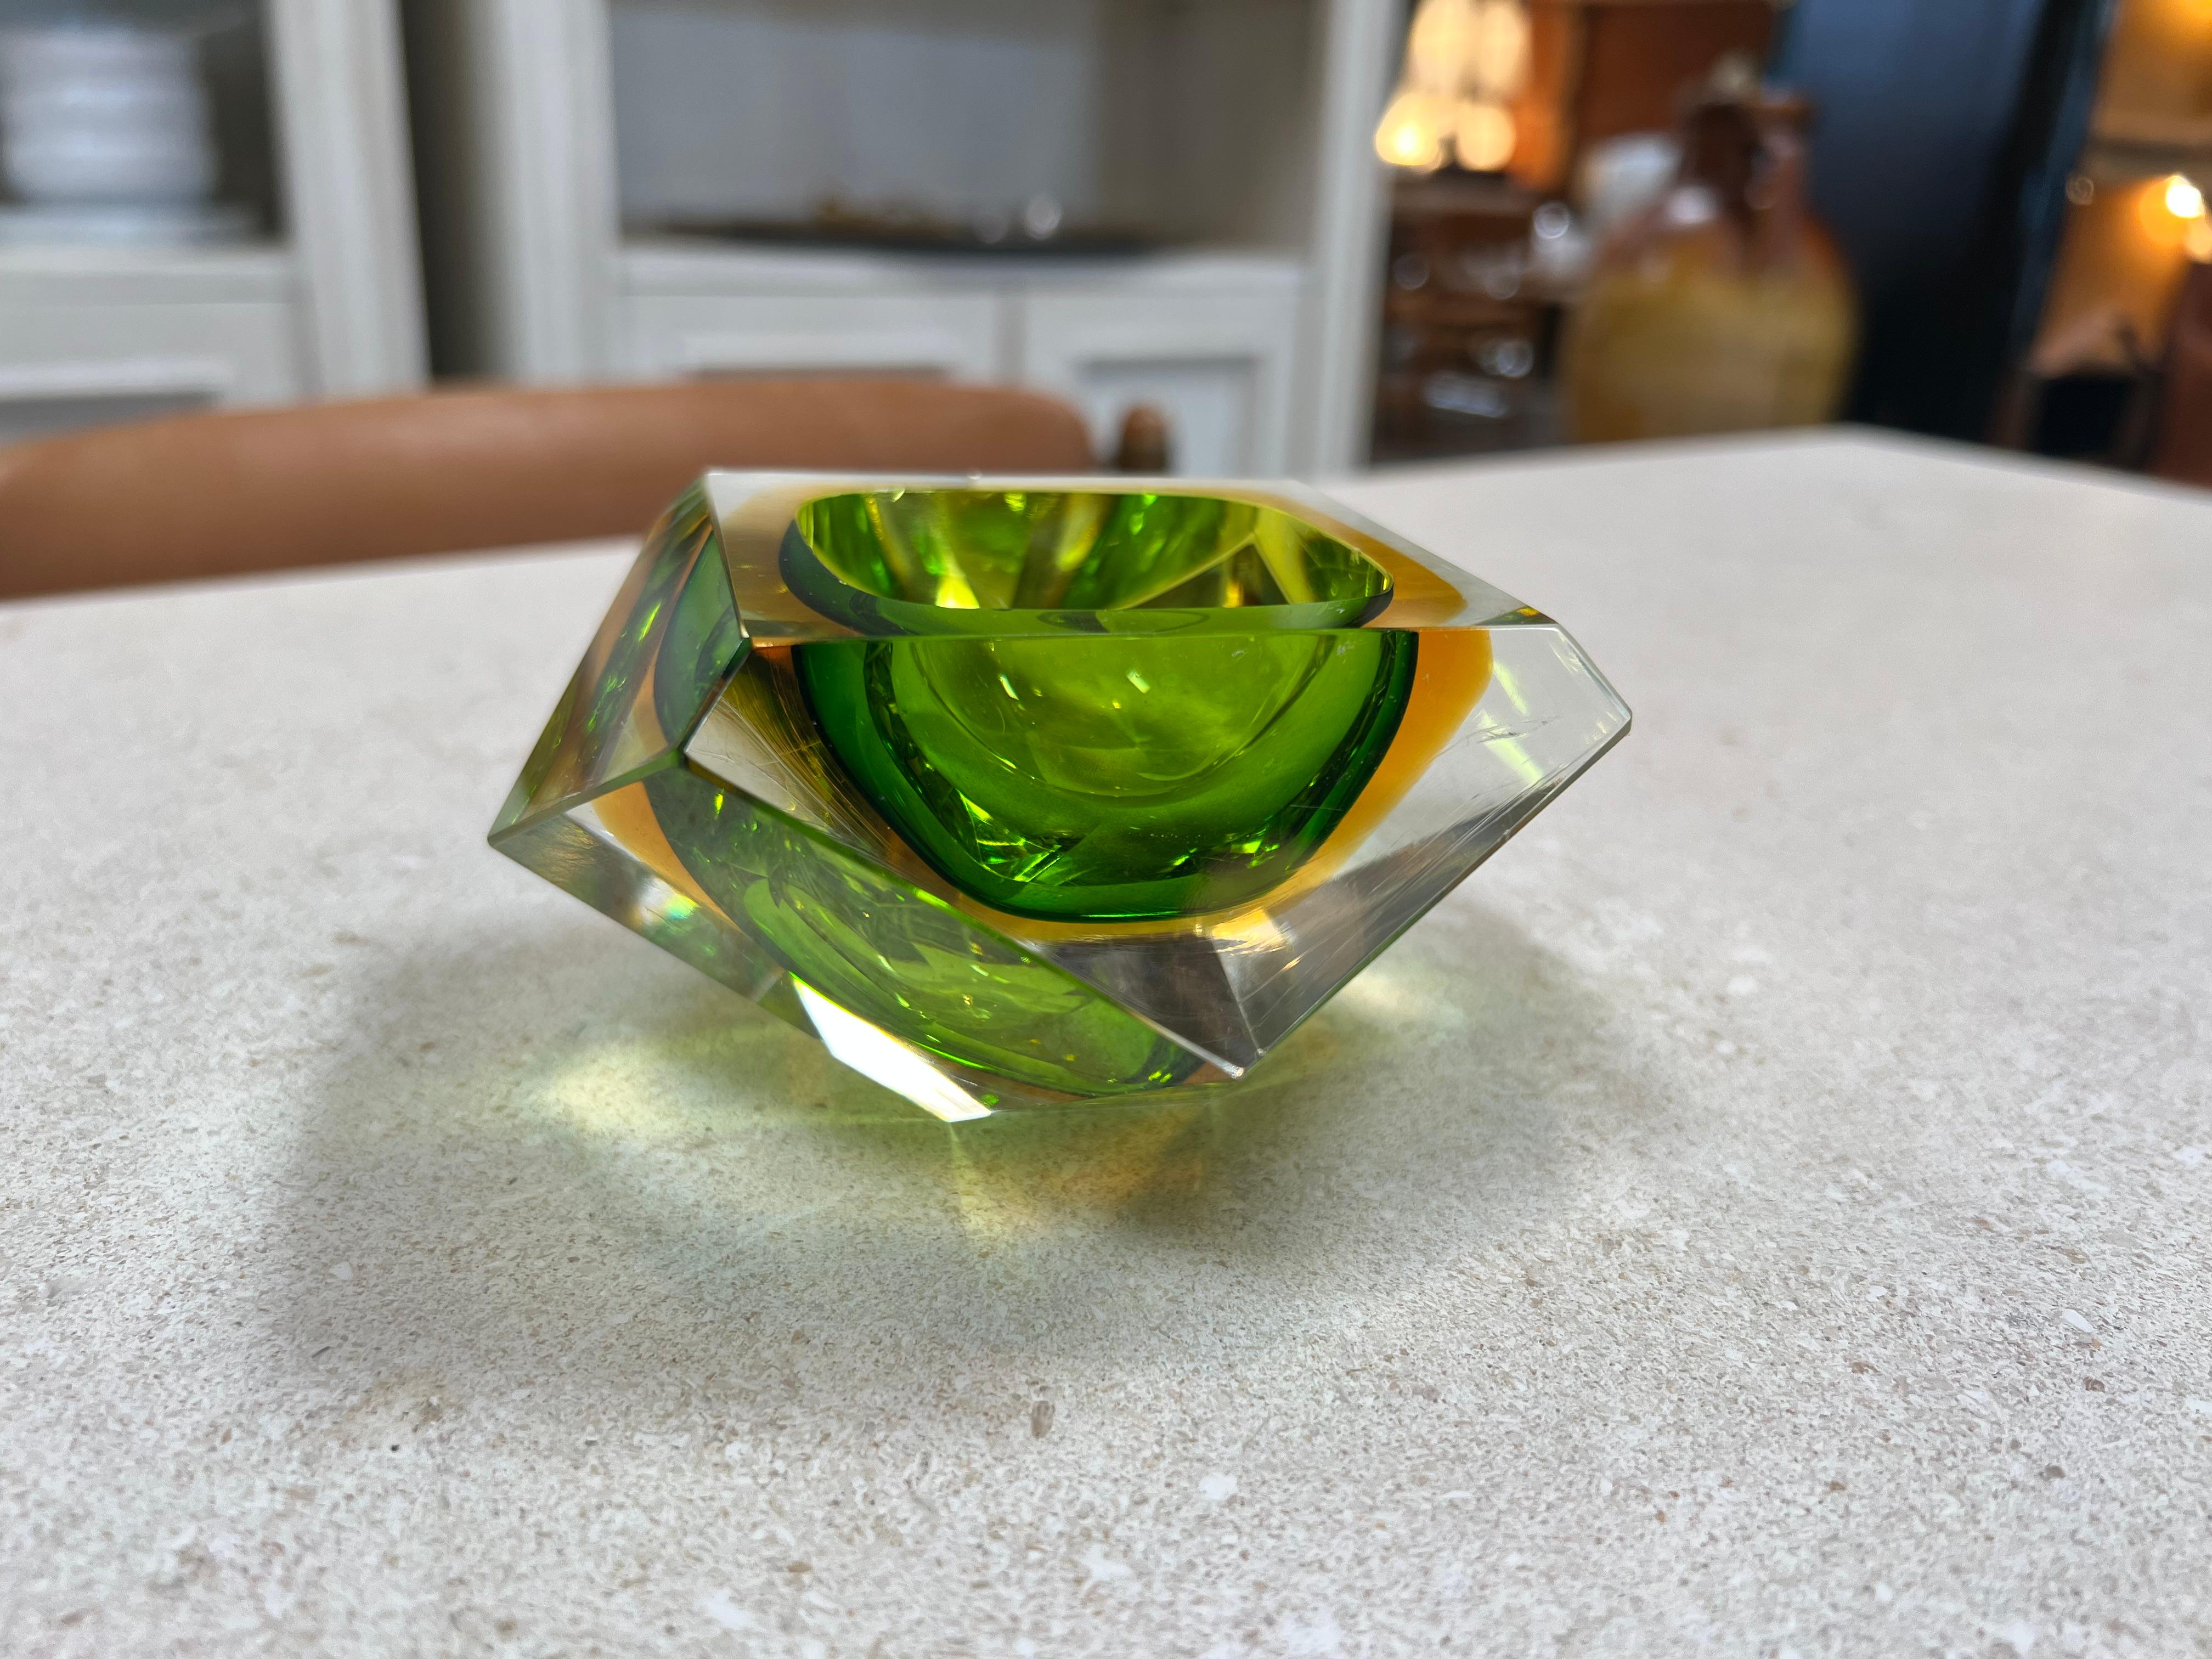 The Beautiful Italian Submerged Green Glass Ashtray from the 1960s is a captivating piece that exudes a sense of tranquility and sophistication. Crafted with care, this ashtray features a mesmerizing design with green-tinted glass that gives the